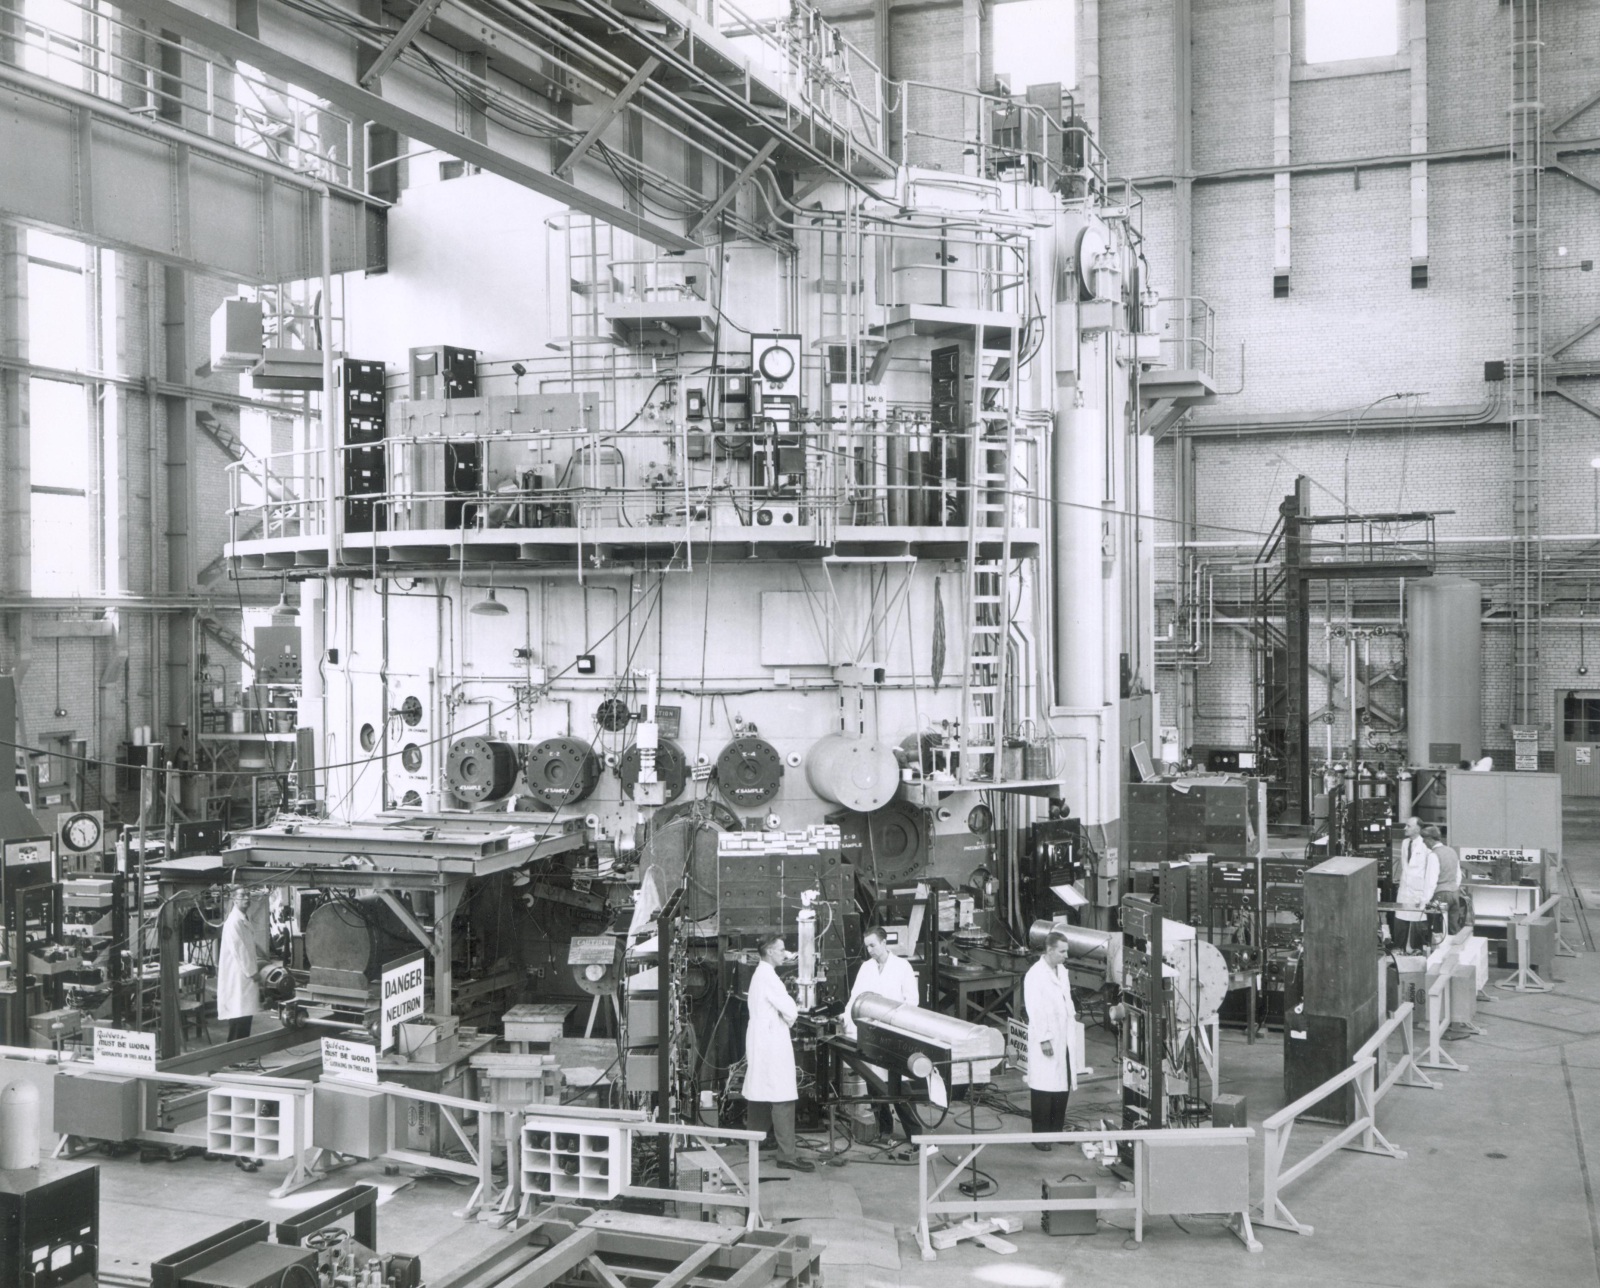 nuclear reactor shown in black and white photo